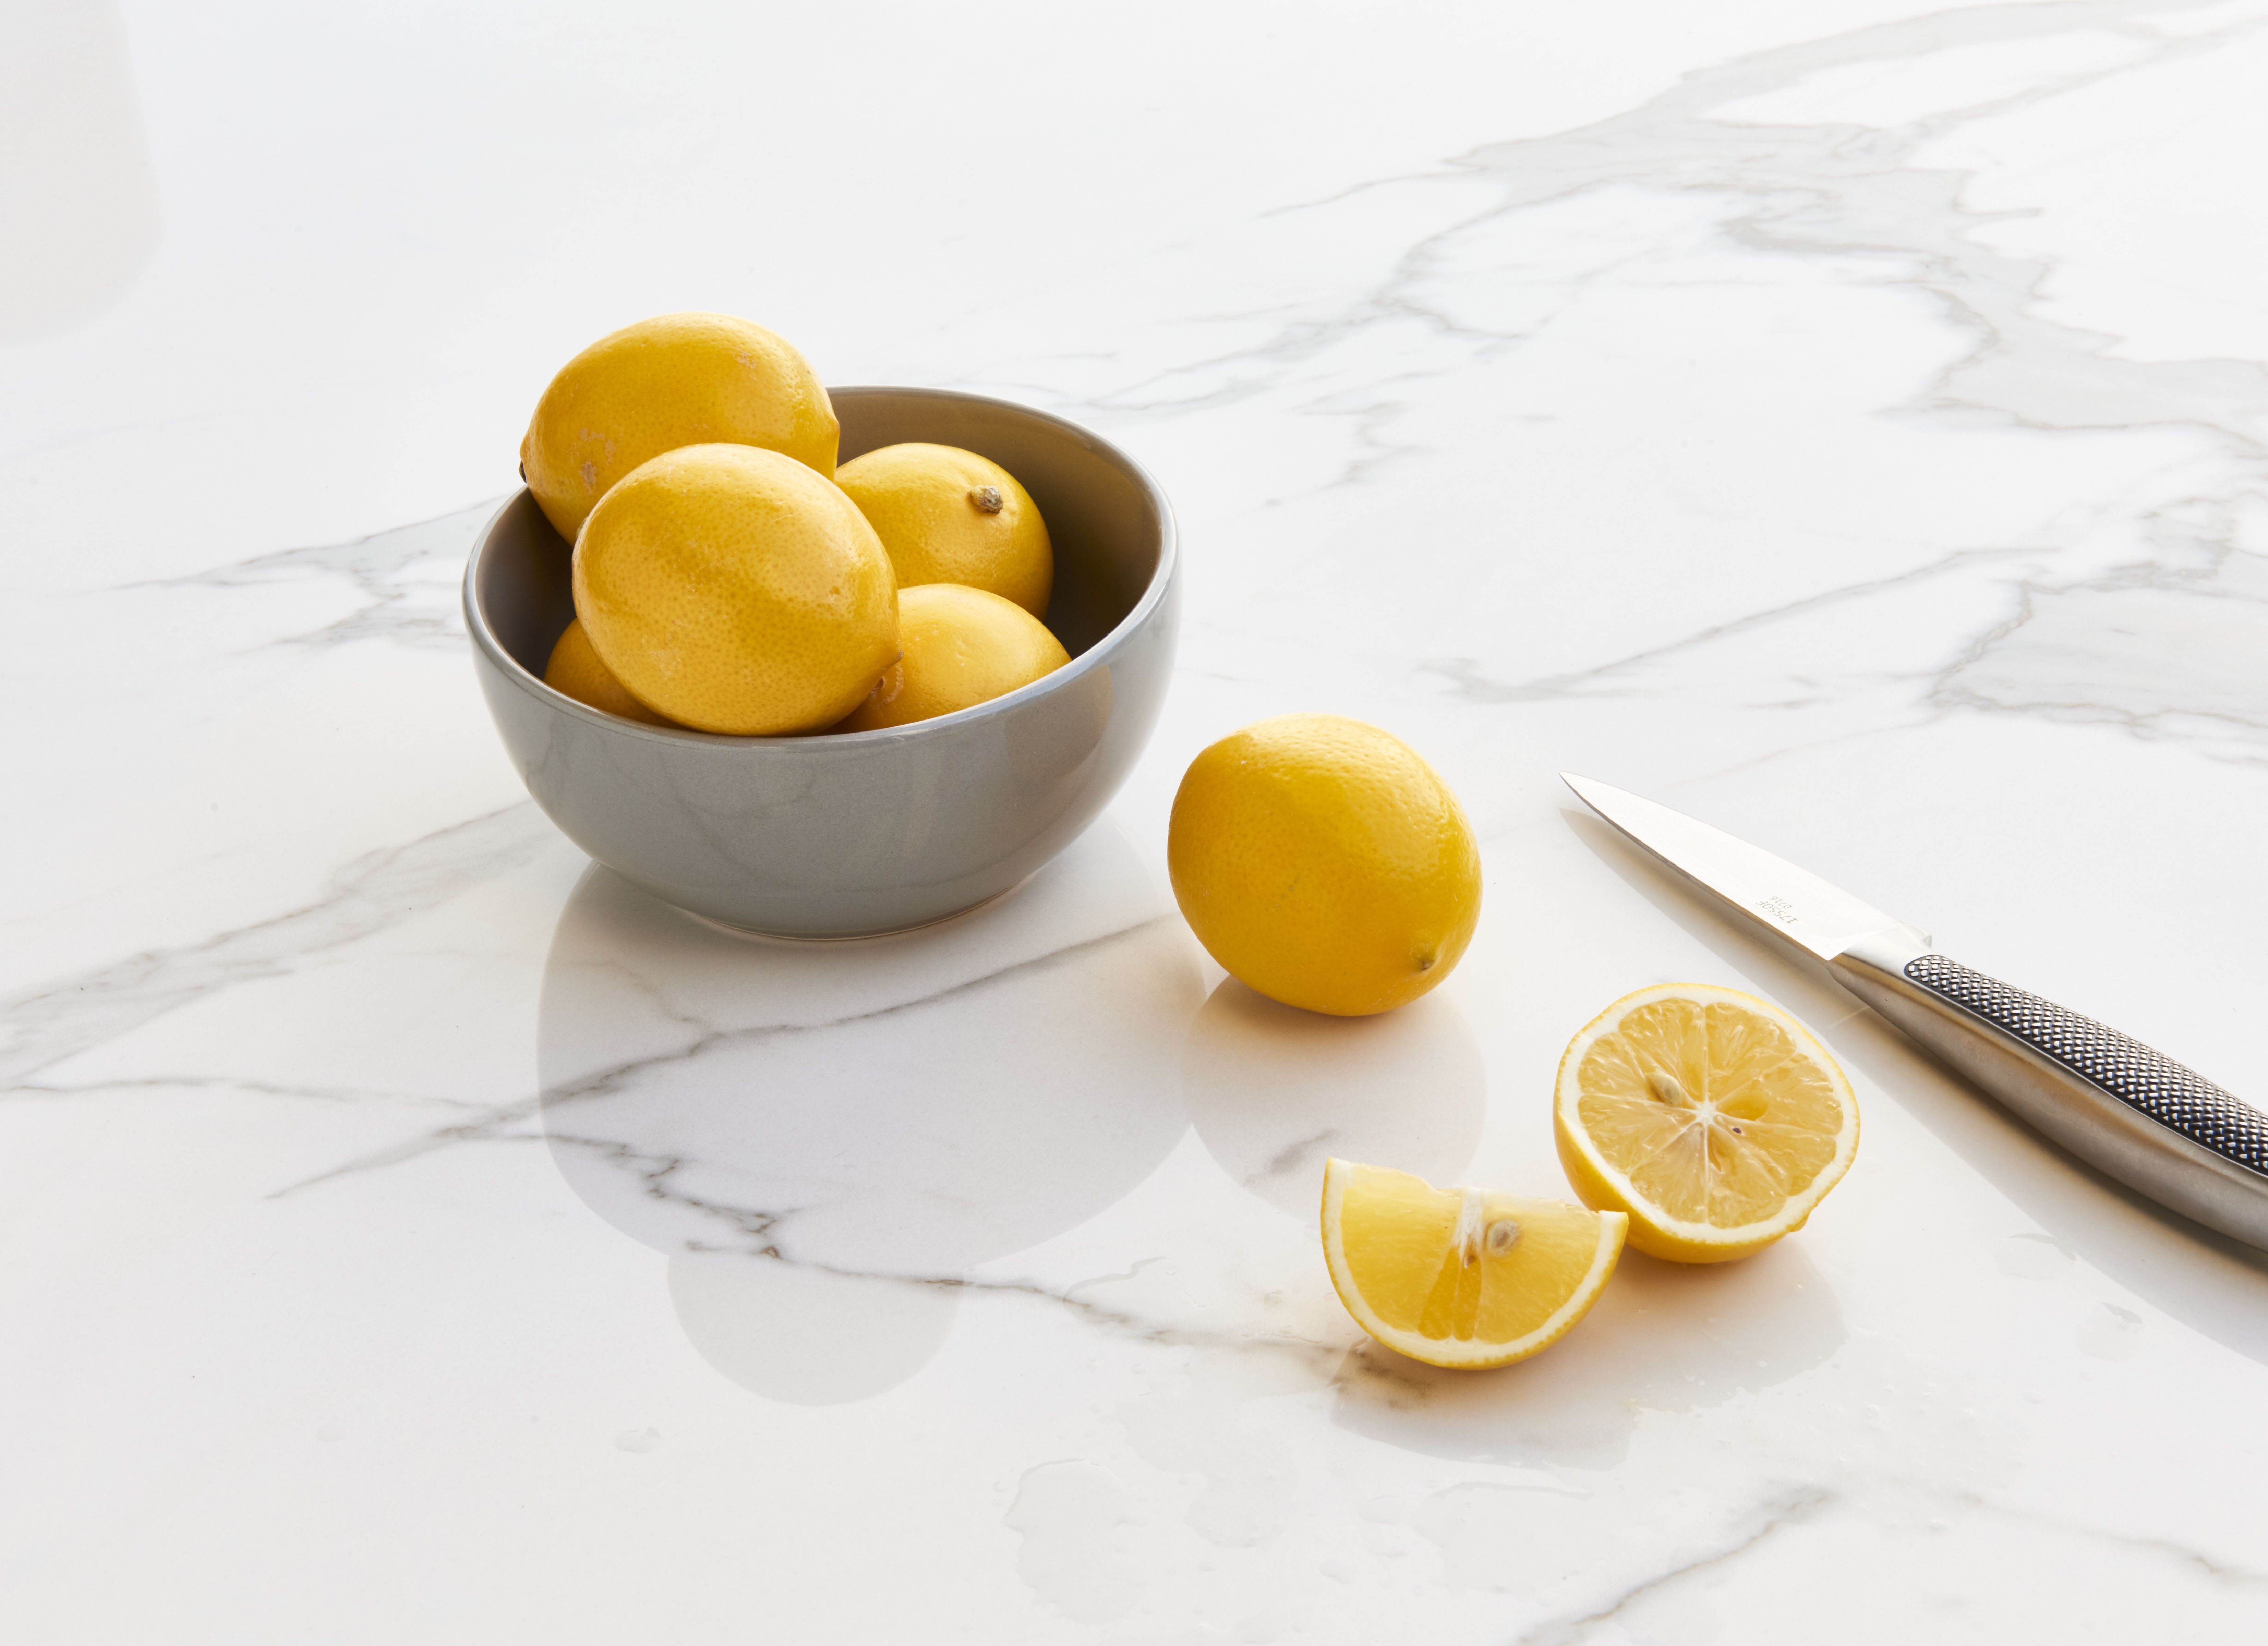 Secolo Porcelain Slabs are fire-proof and stain-proof, making it impervious to red wine, lemon juice and other acids that are common culprits of staining natural stone. Shown: Calacata Classic.